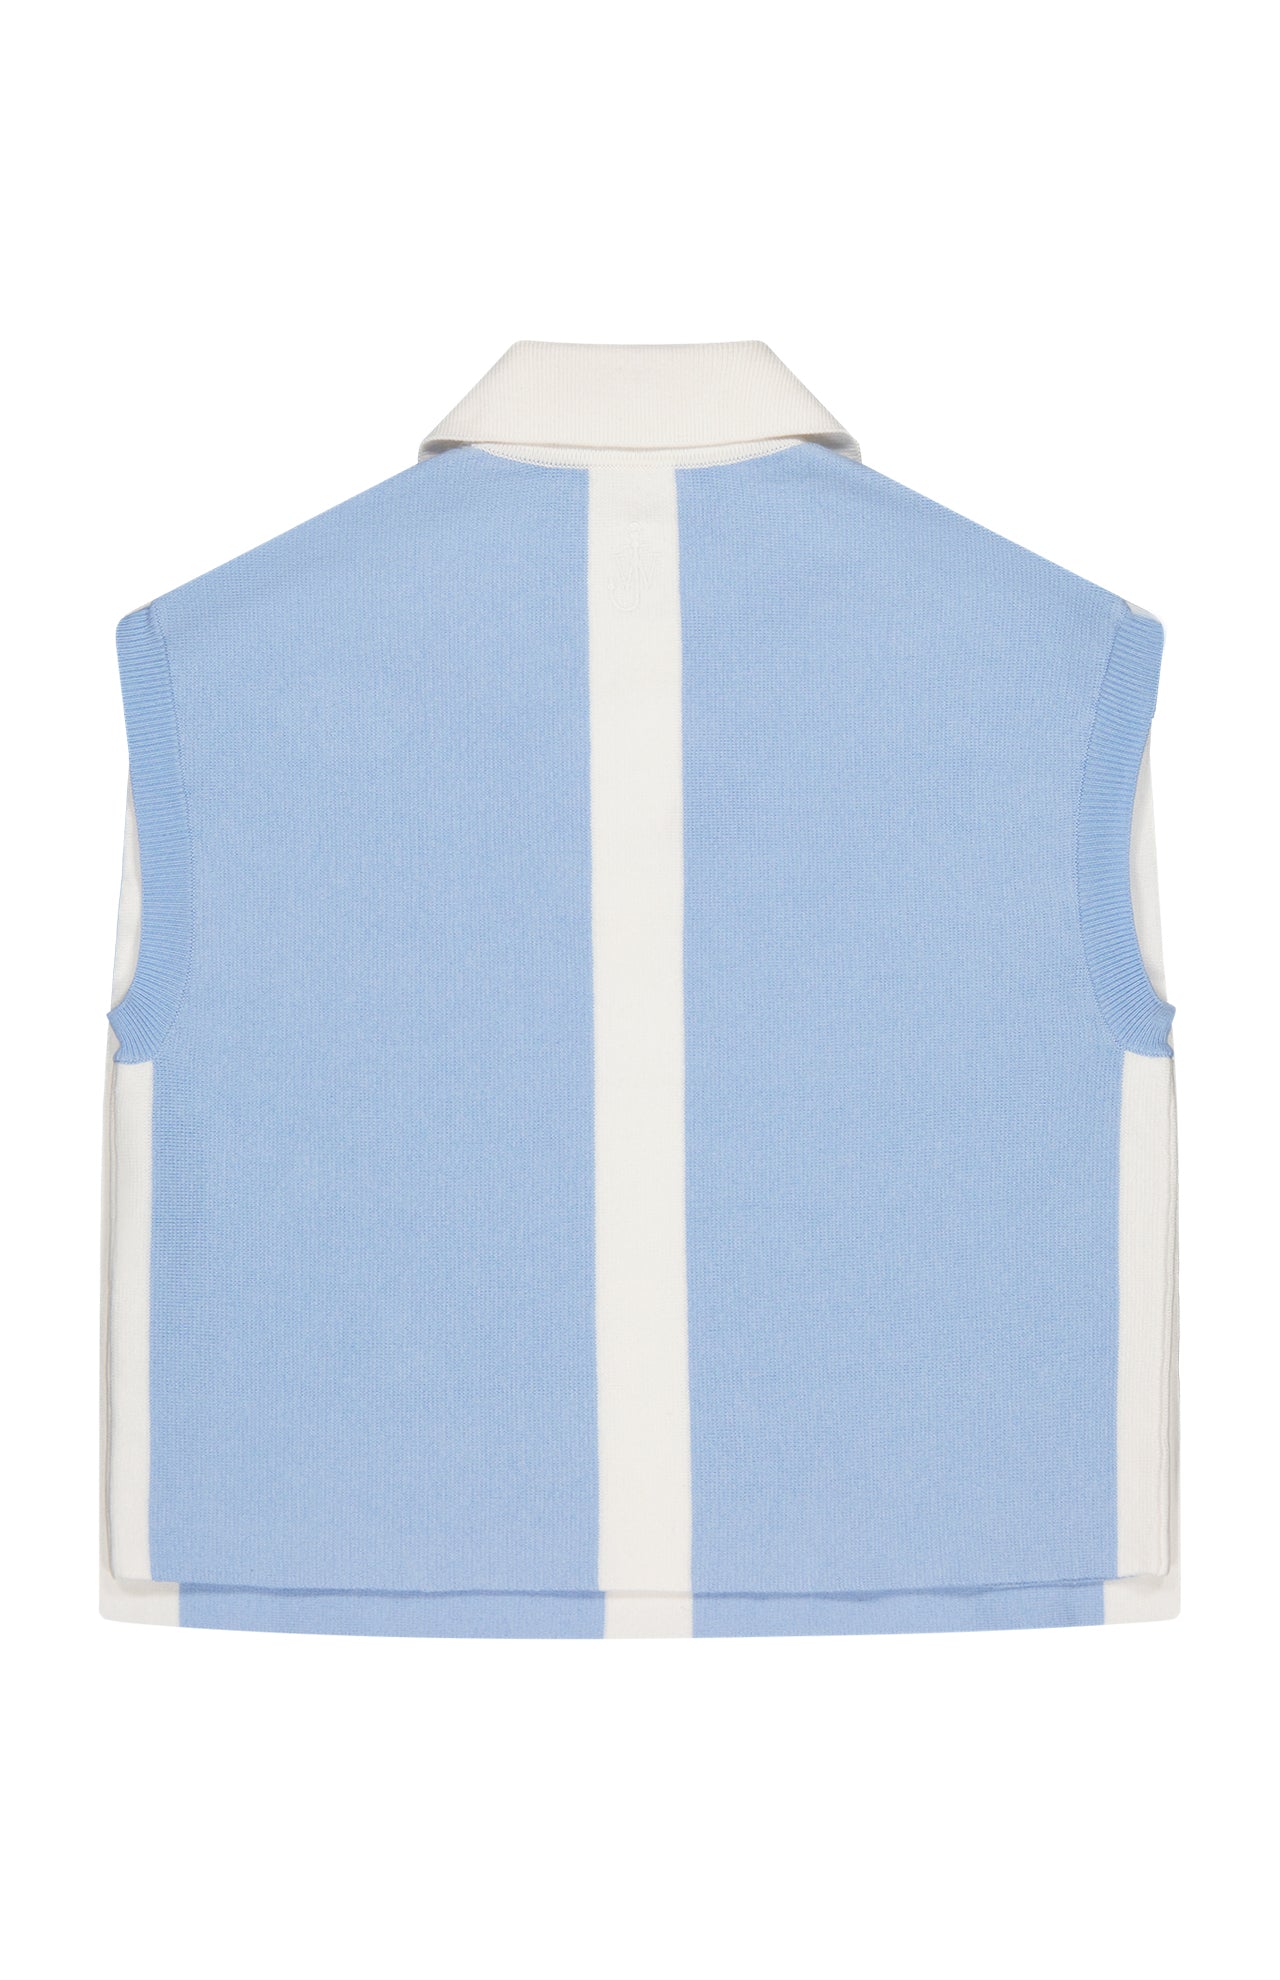 Layered Contrast Polo Vest (7312310272115)